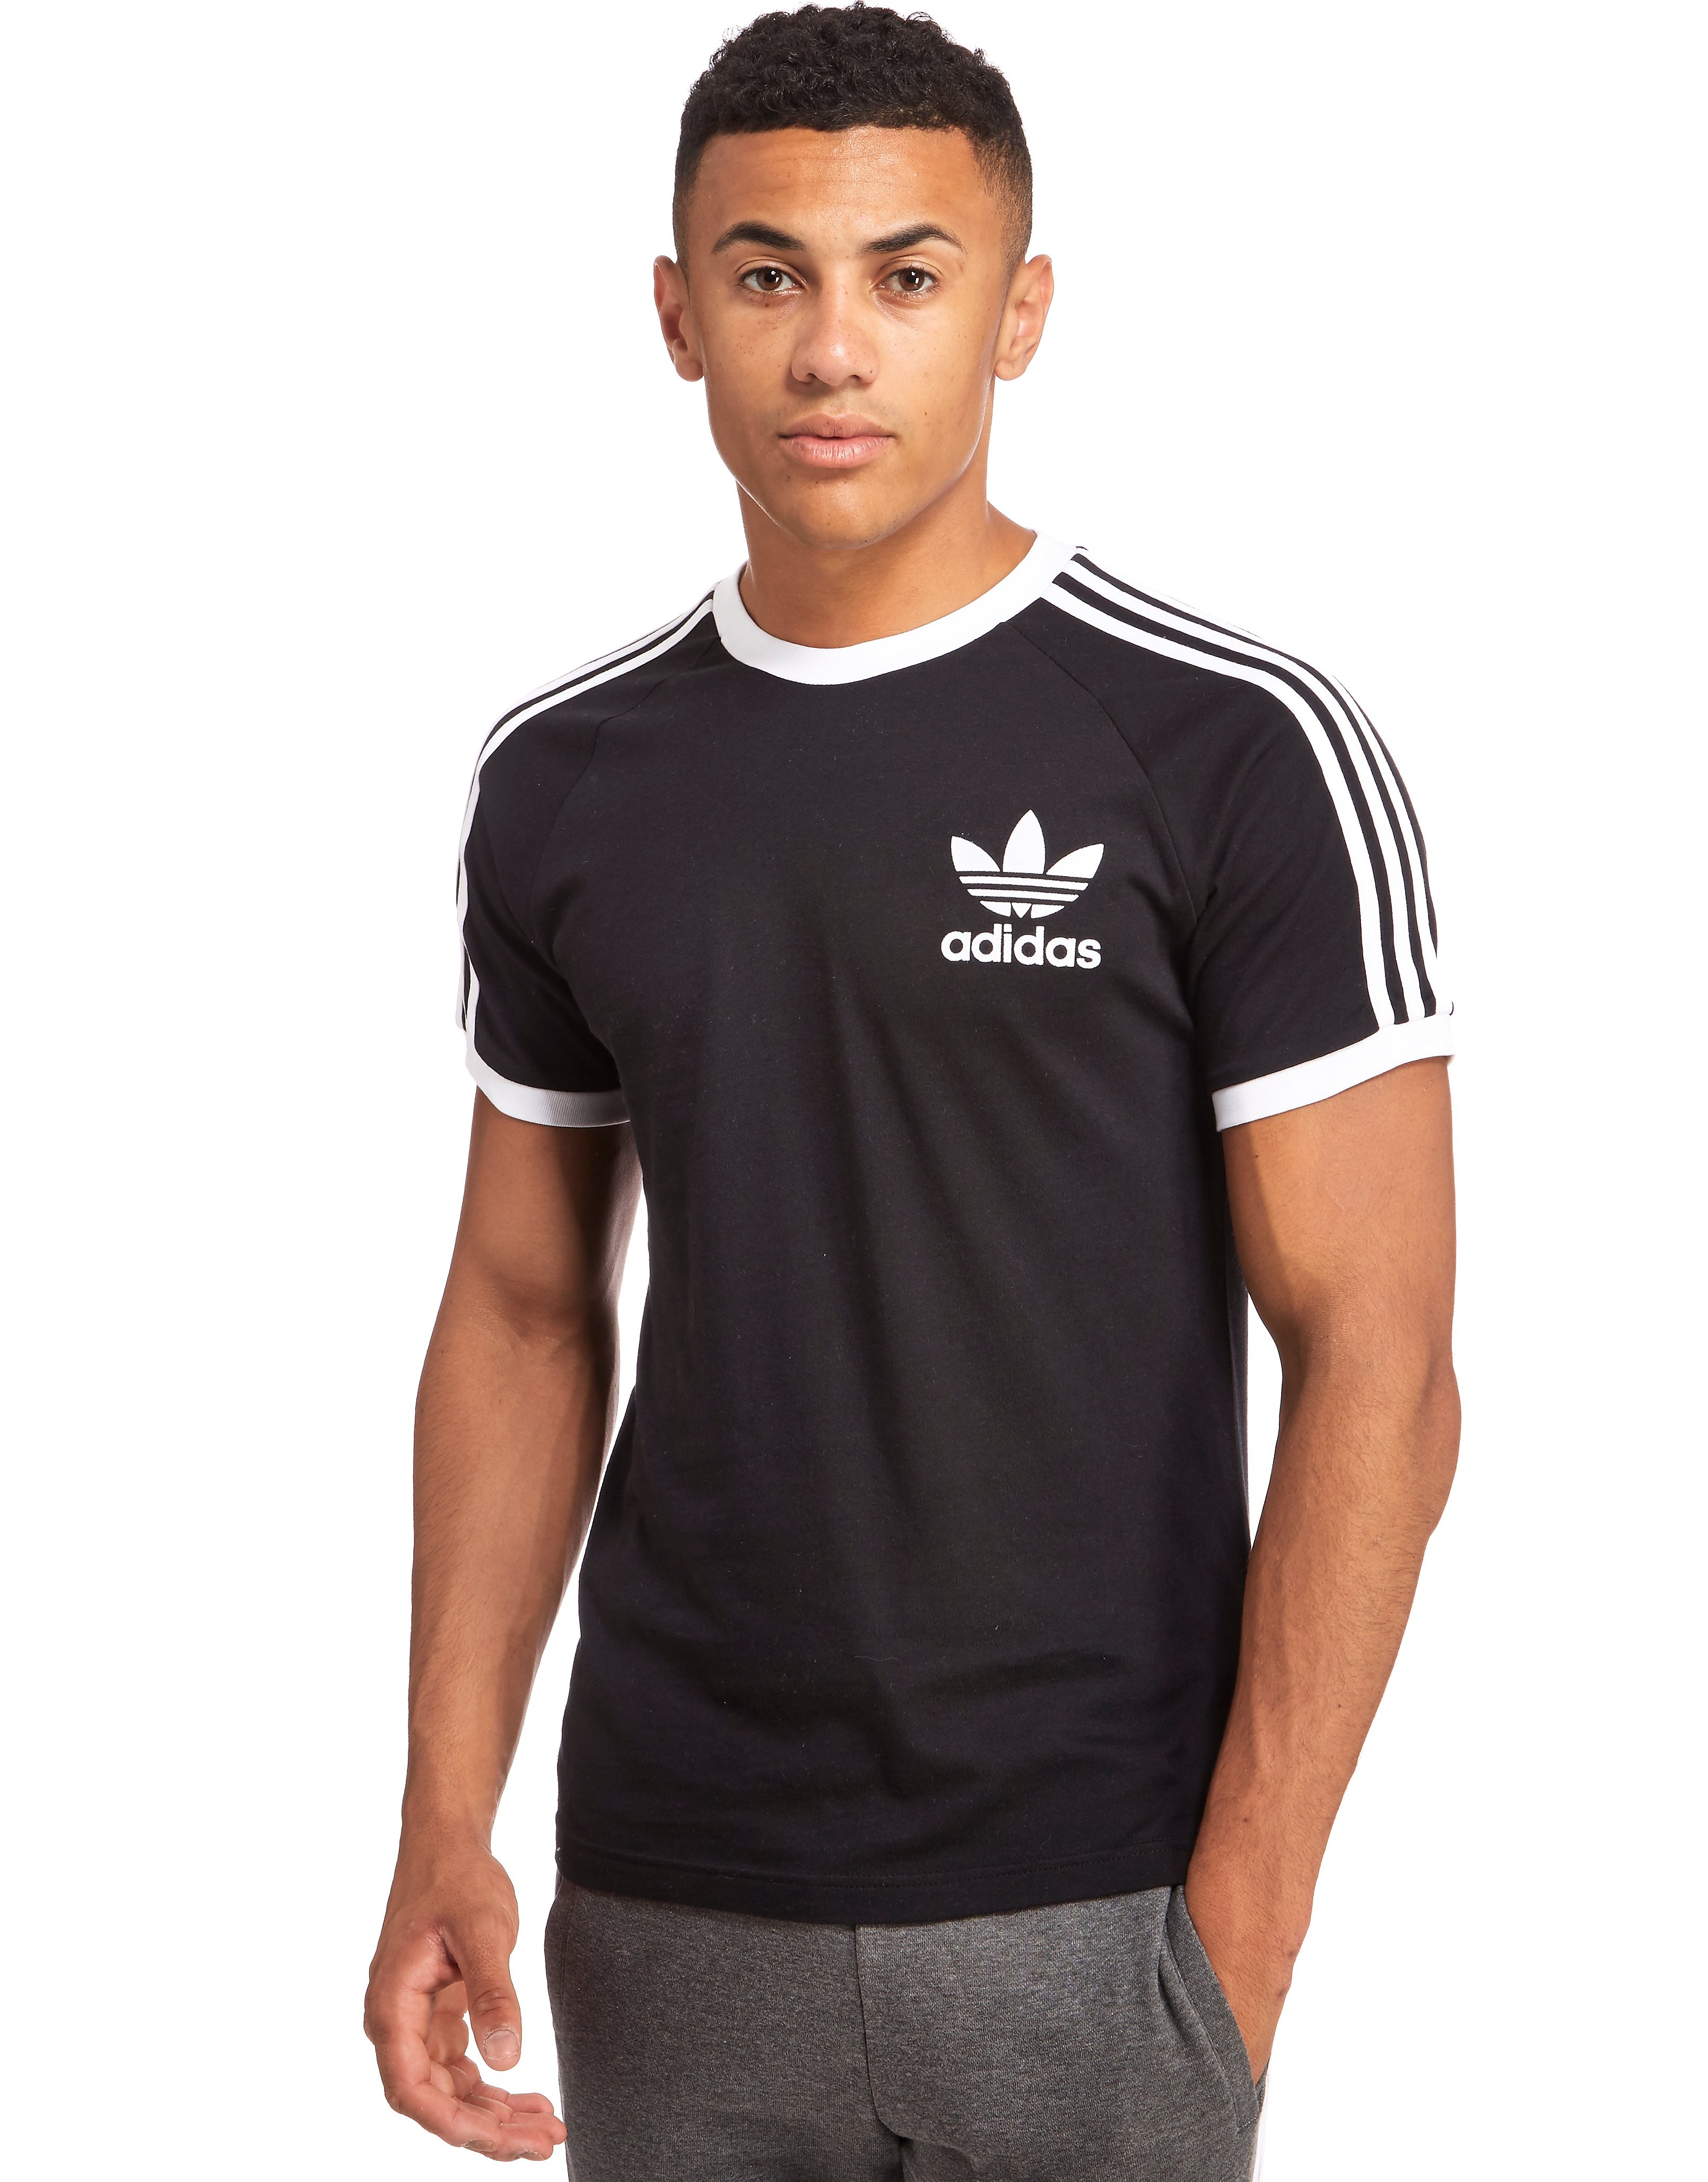 Men's Adidas Originals | Trainers, Tracksuits & Clothing | JD Sports